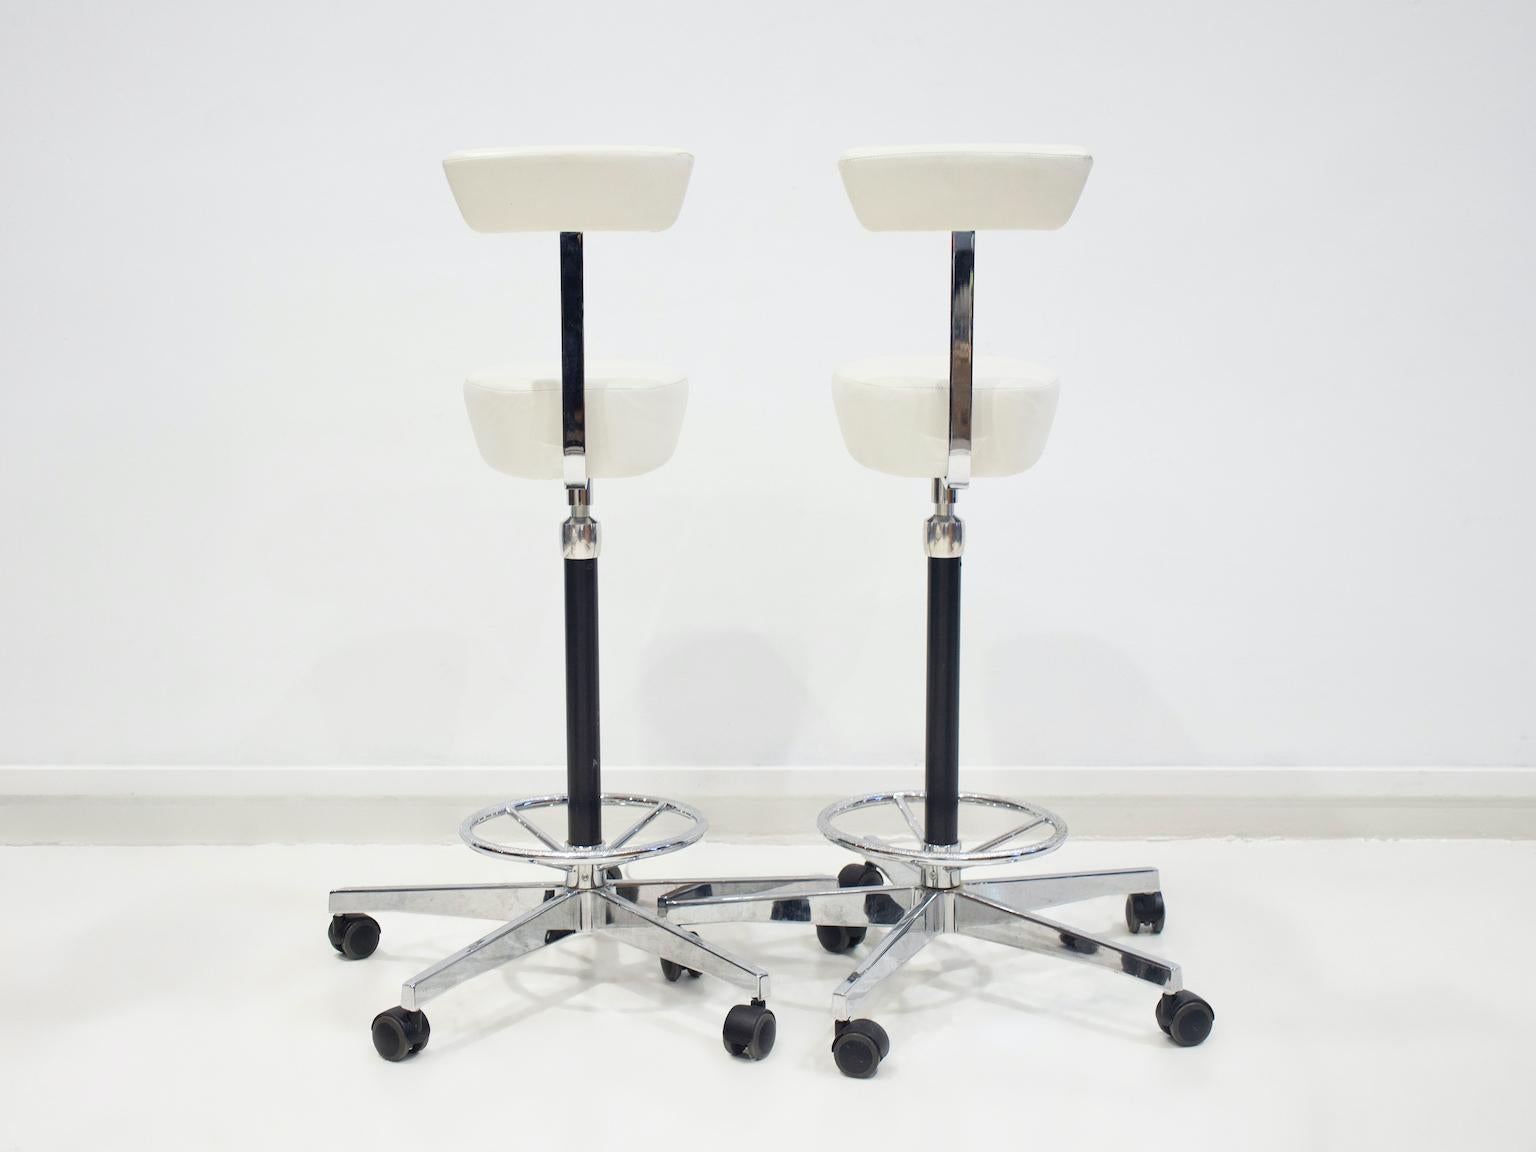 European Pair of White Perch Chairs by George Nelson for Vitra For Sale